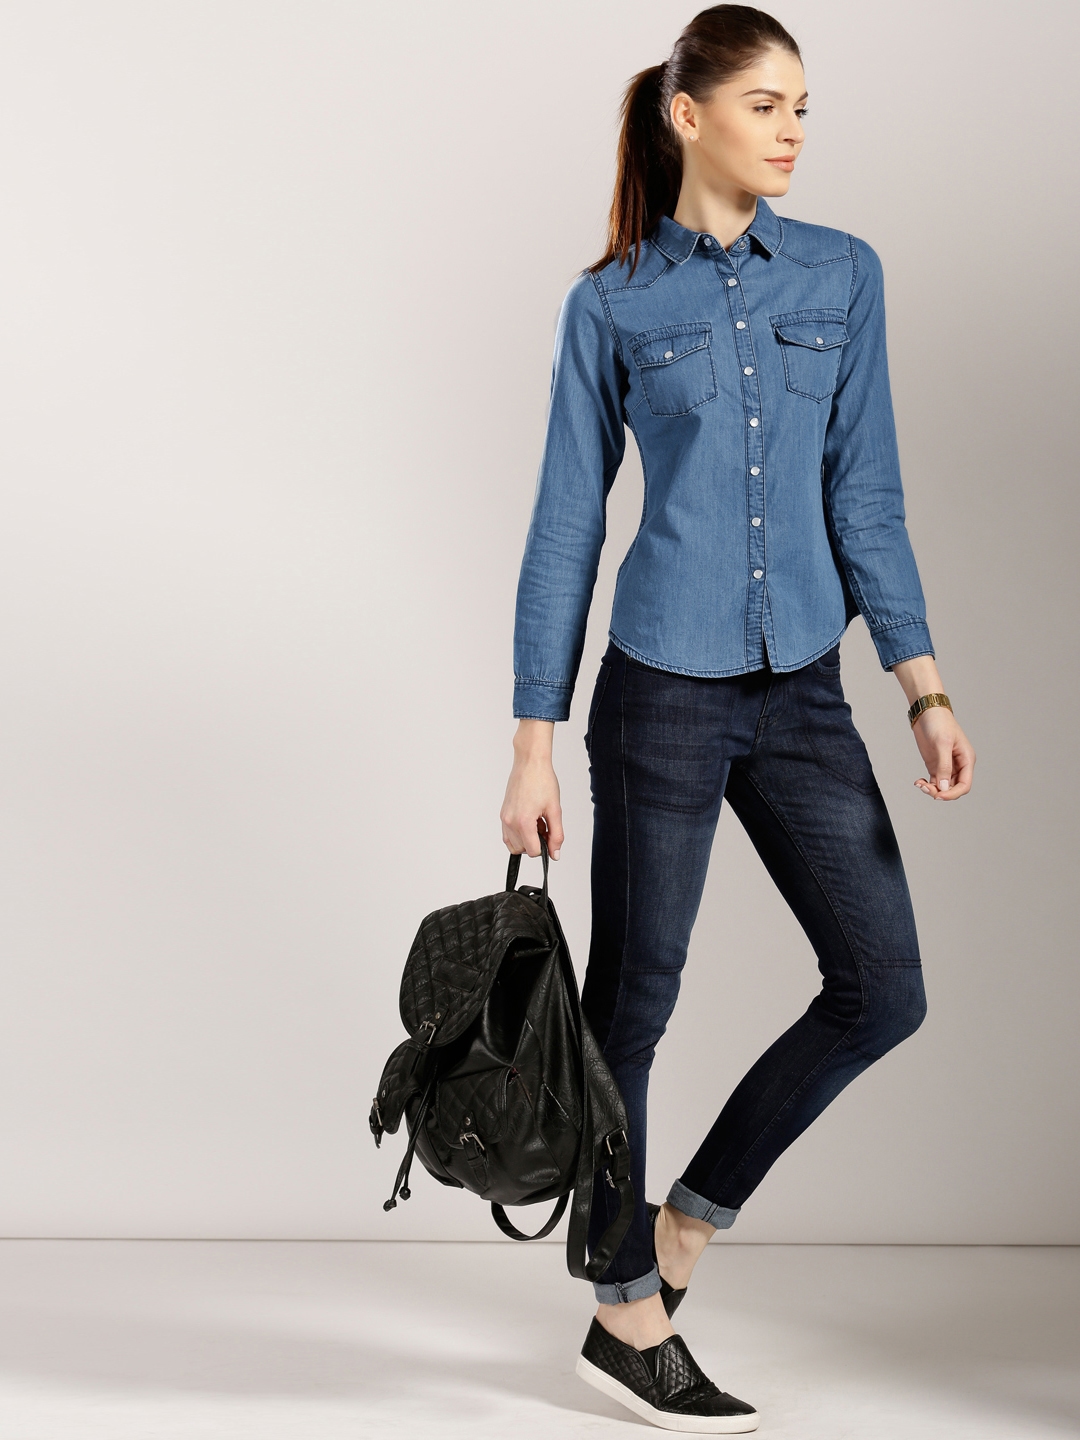 With denim shirt, blue bag and sneakers